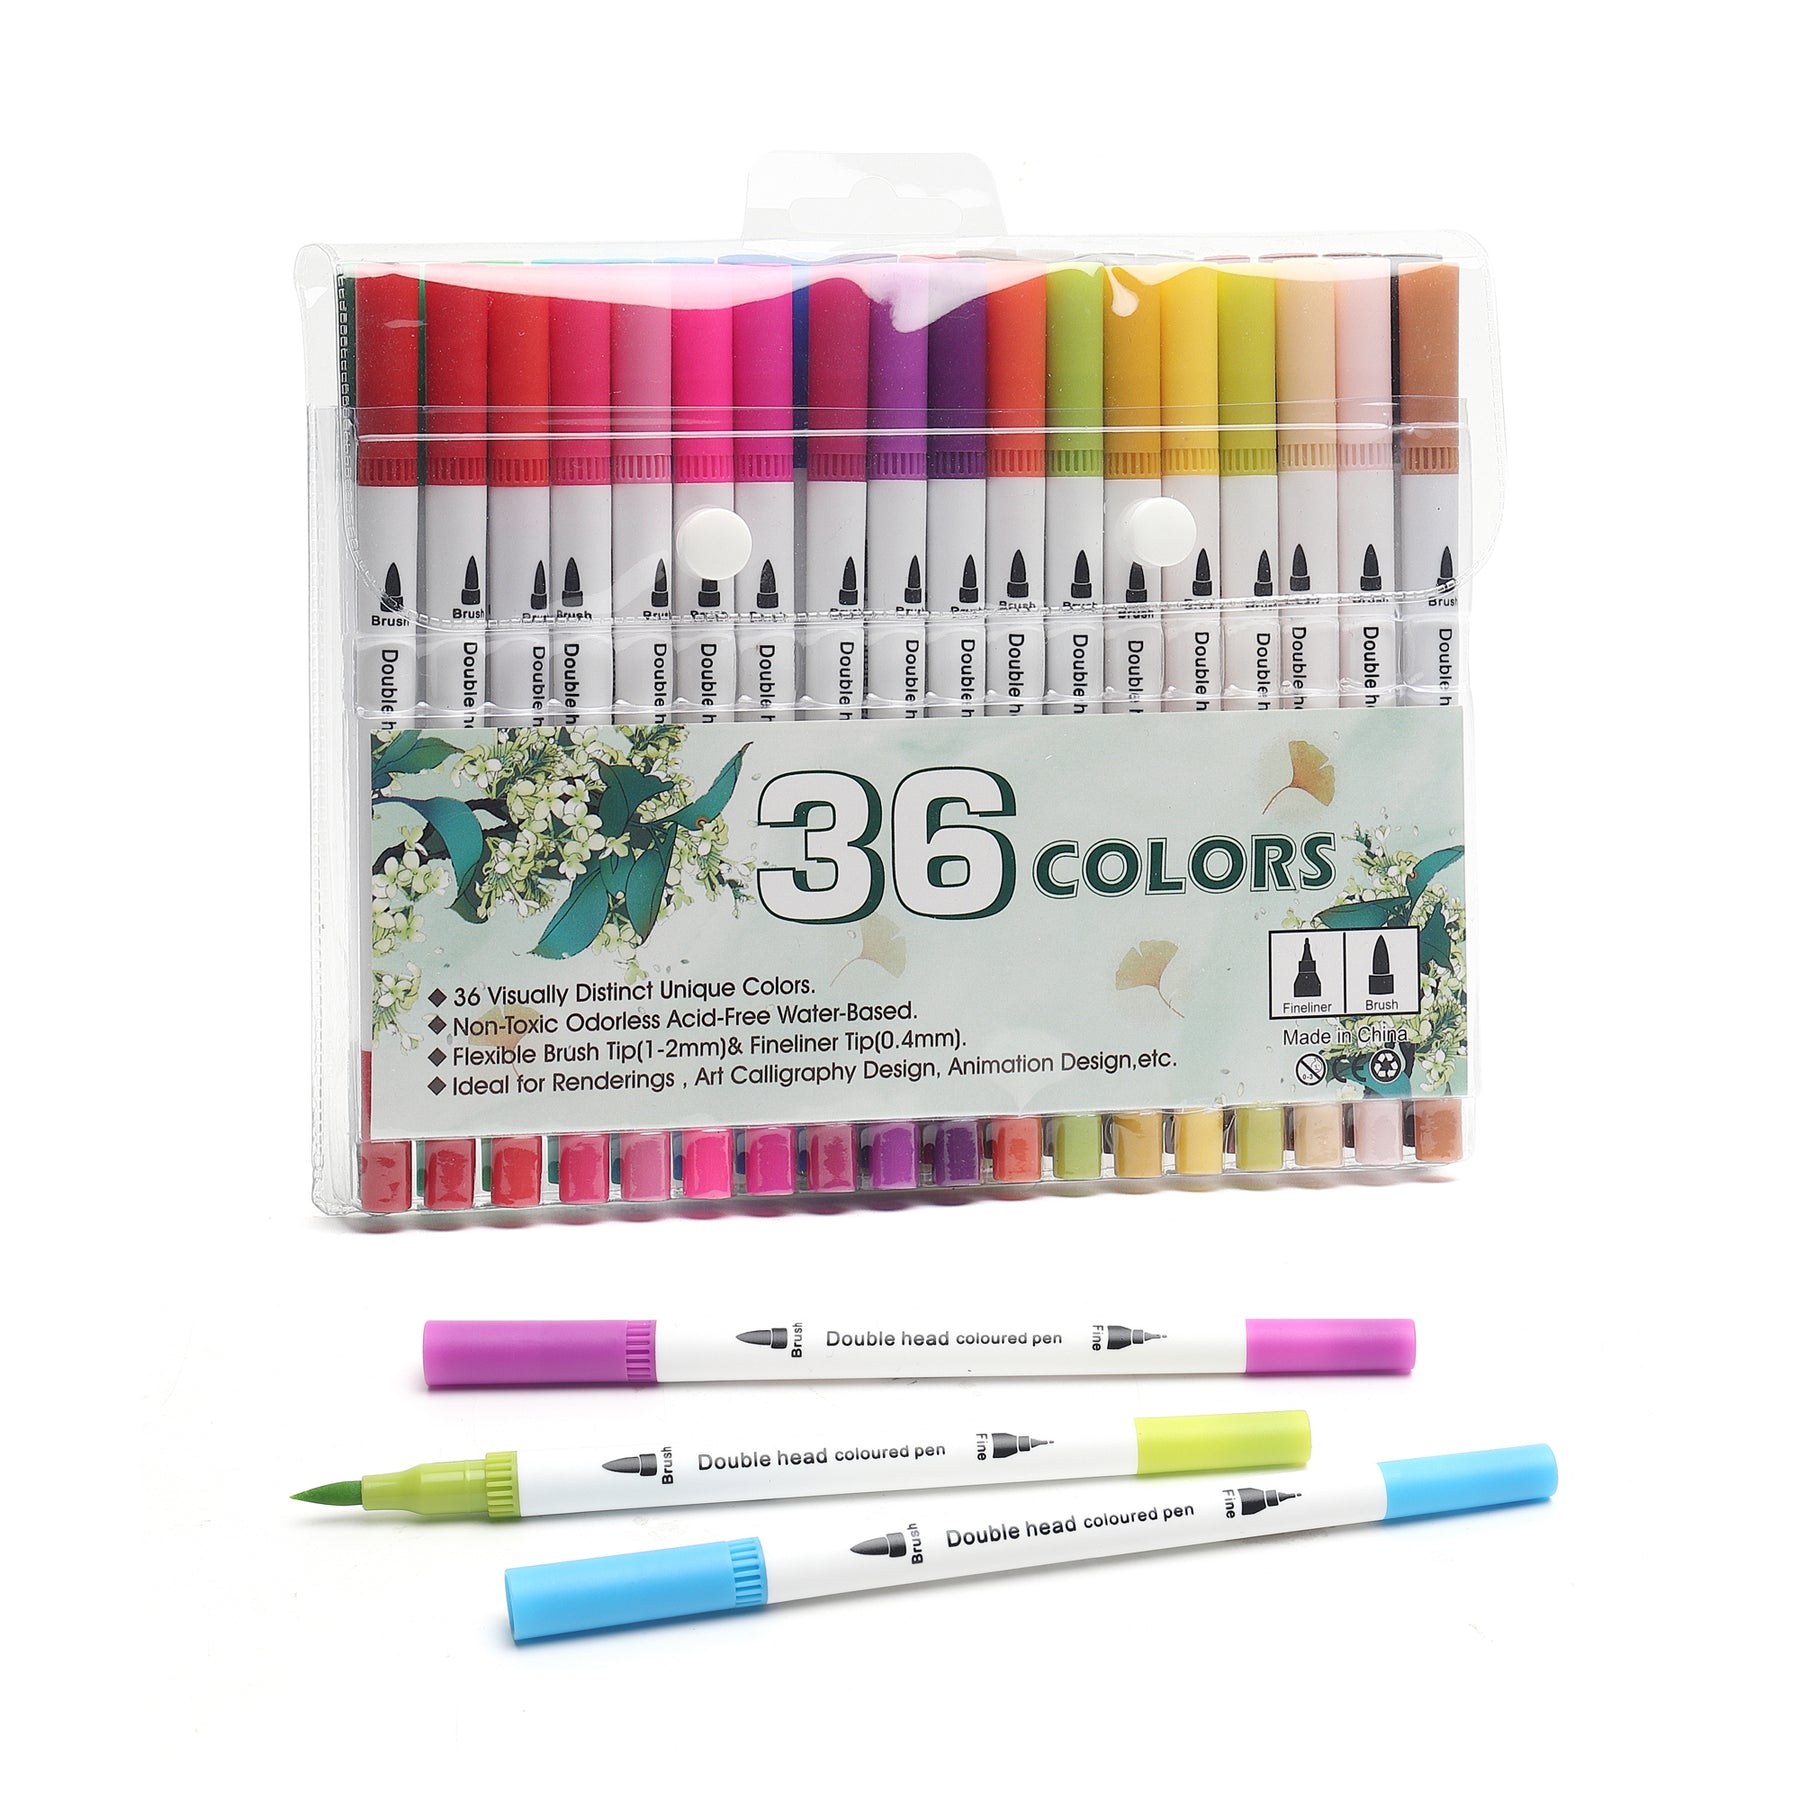 36 Colors Dual Tip Brush Pens Highlighter Art Markers 0.4mm Fine